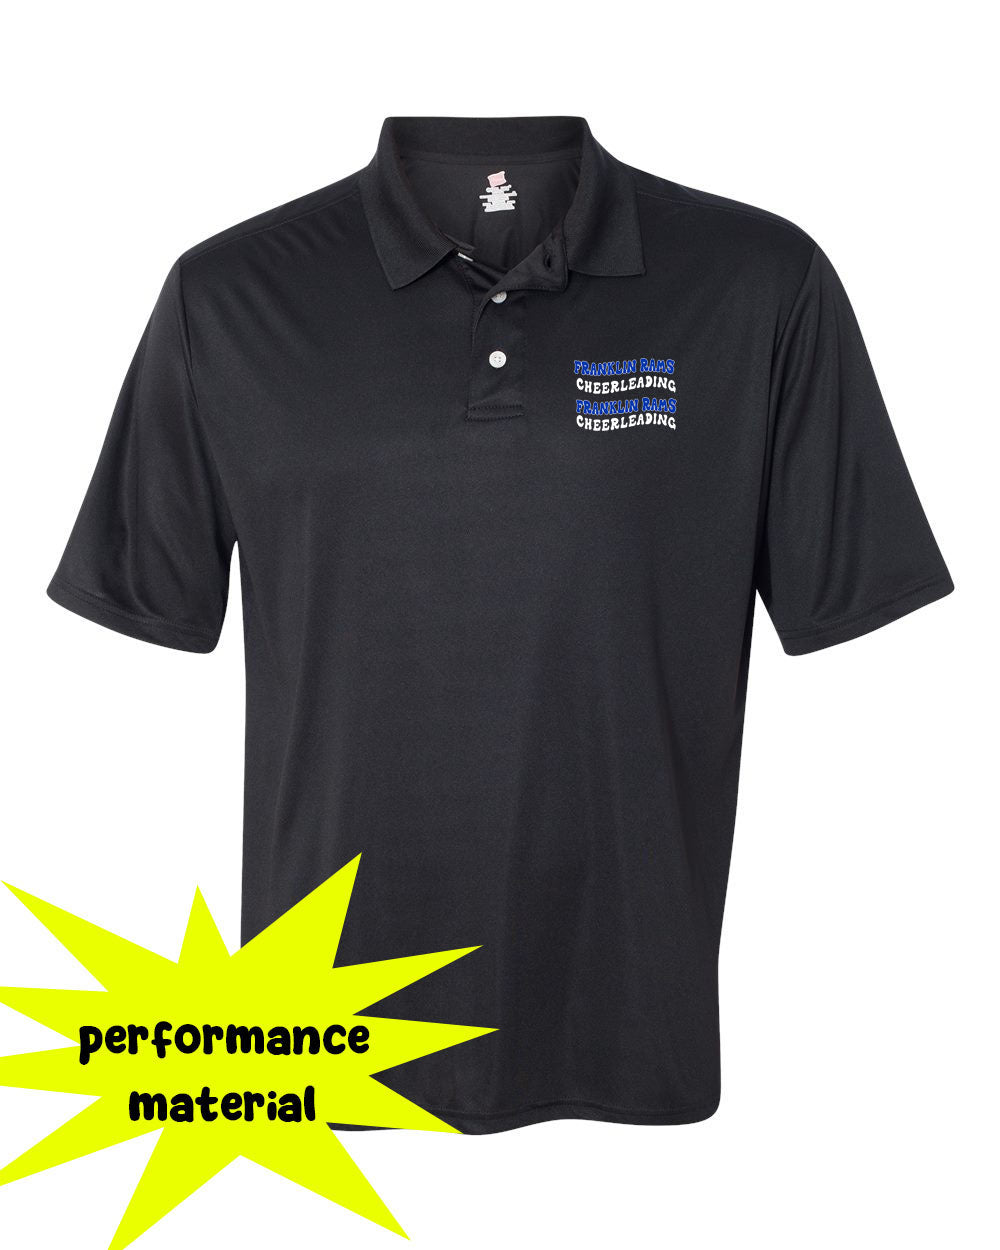 Franklin Cheer Performance Material Polo T-Shirt Design 1